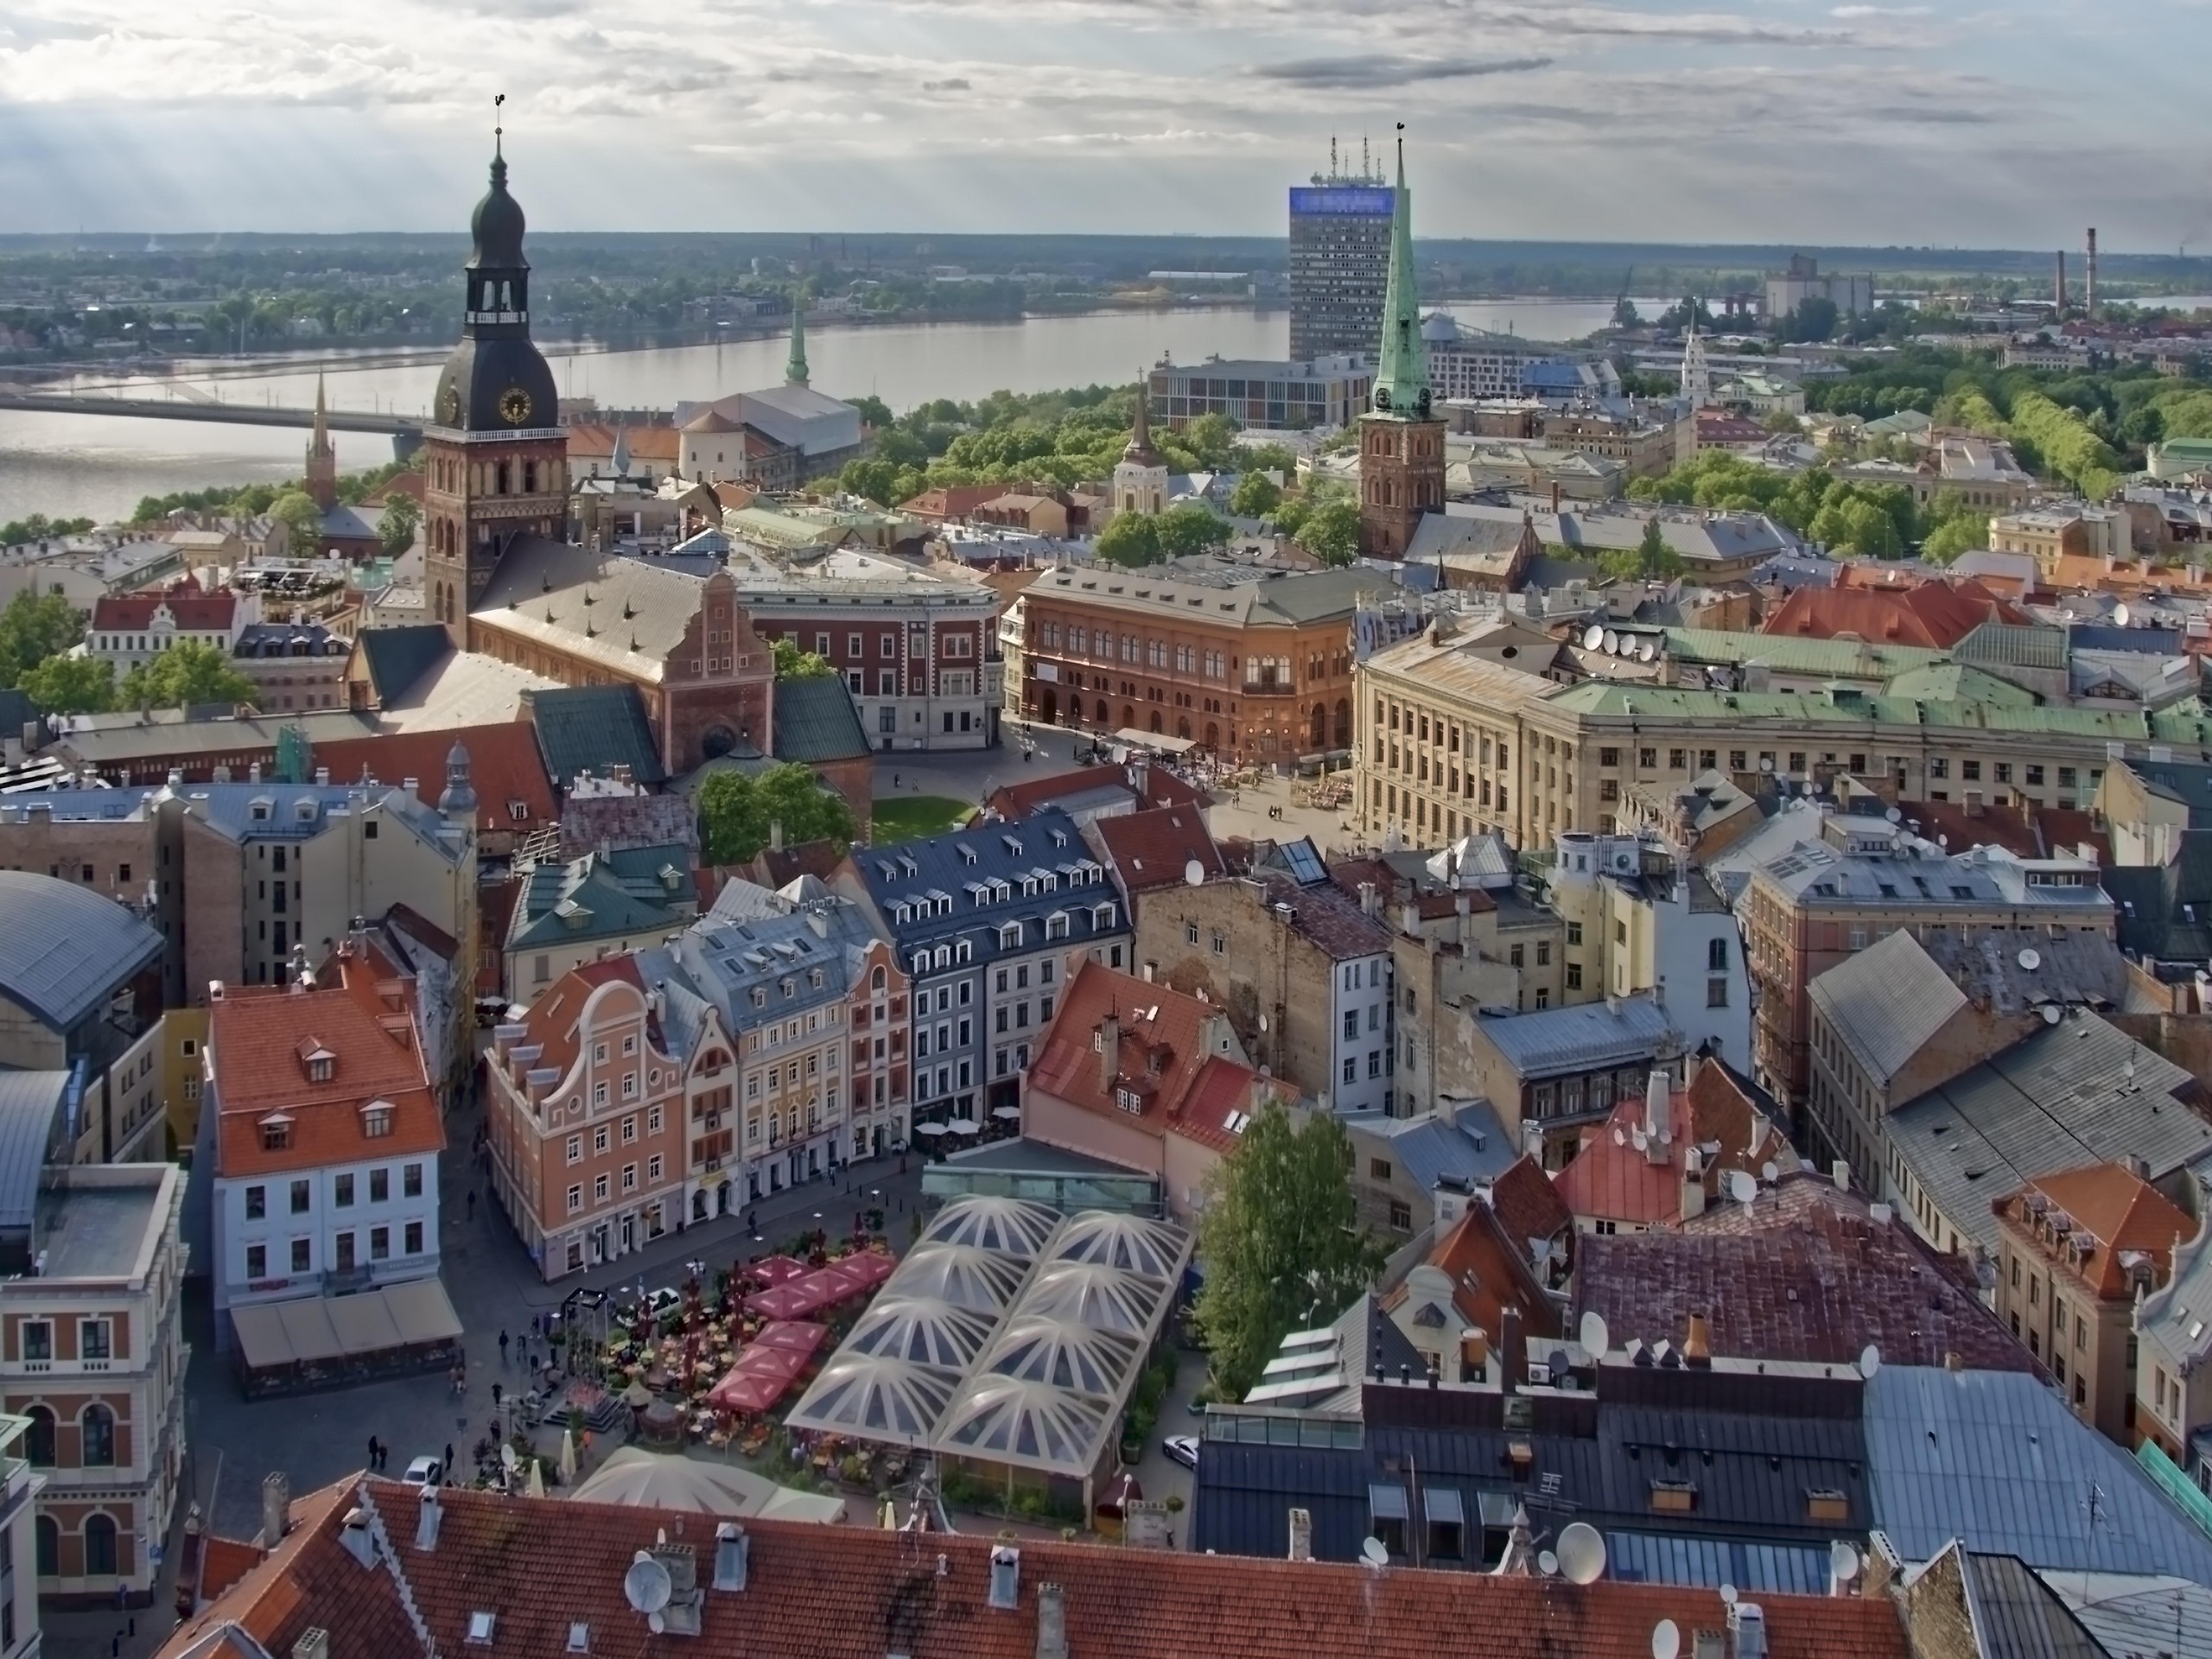 Riga as seen from the above